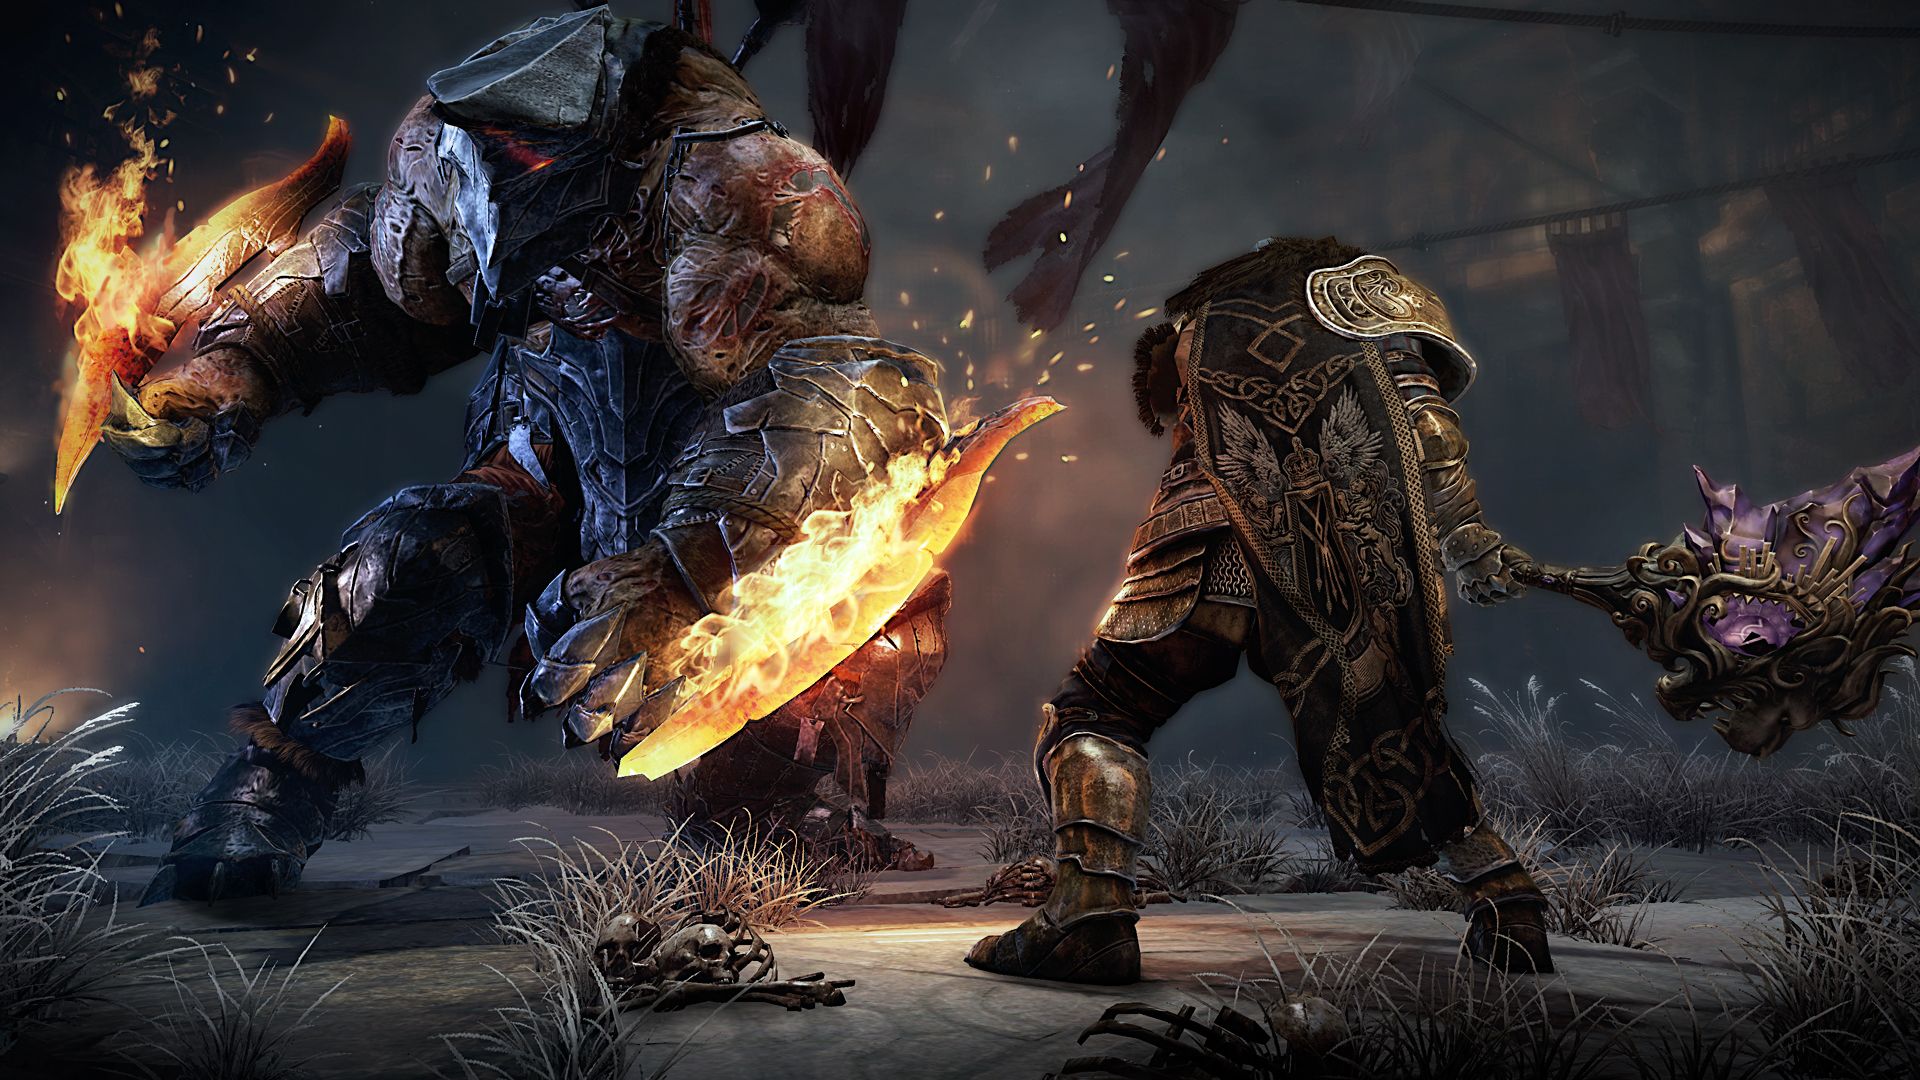 Lords of the Fallen PC Screenshots - Image #16179